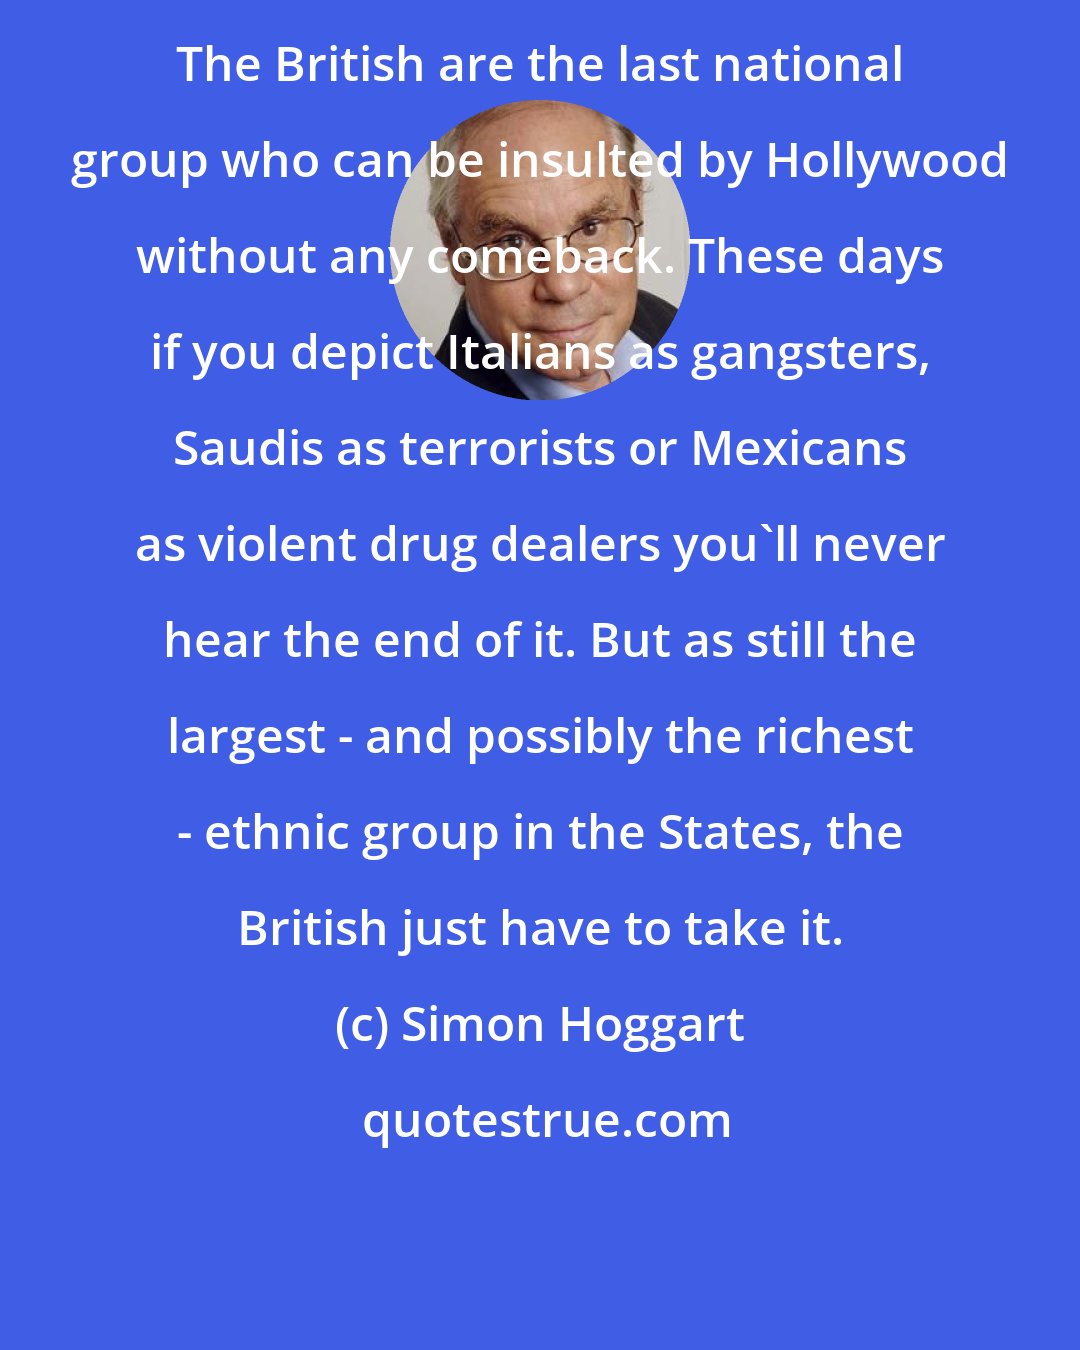 Simon Hoggart: The British are the last national group who can be insulted by Hollywood without any comeback. These days if you depict Italians as gangsters, Saudis as terrorists or Mexicans as violent drug dealers you'll never hear the end of it. But as still the largest - and possibly the richest - ethnic group in the States, the British just have to take it.